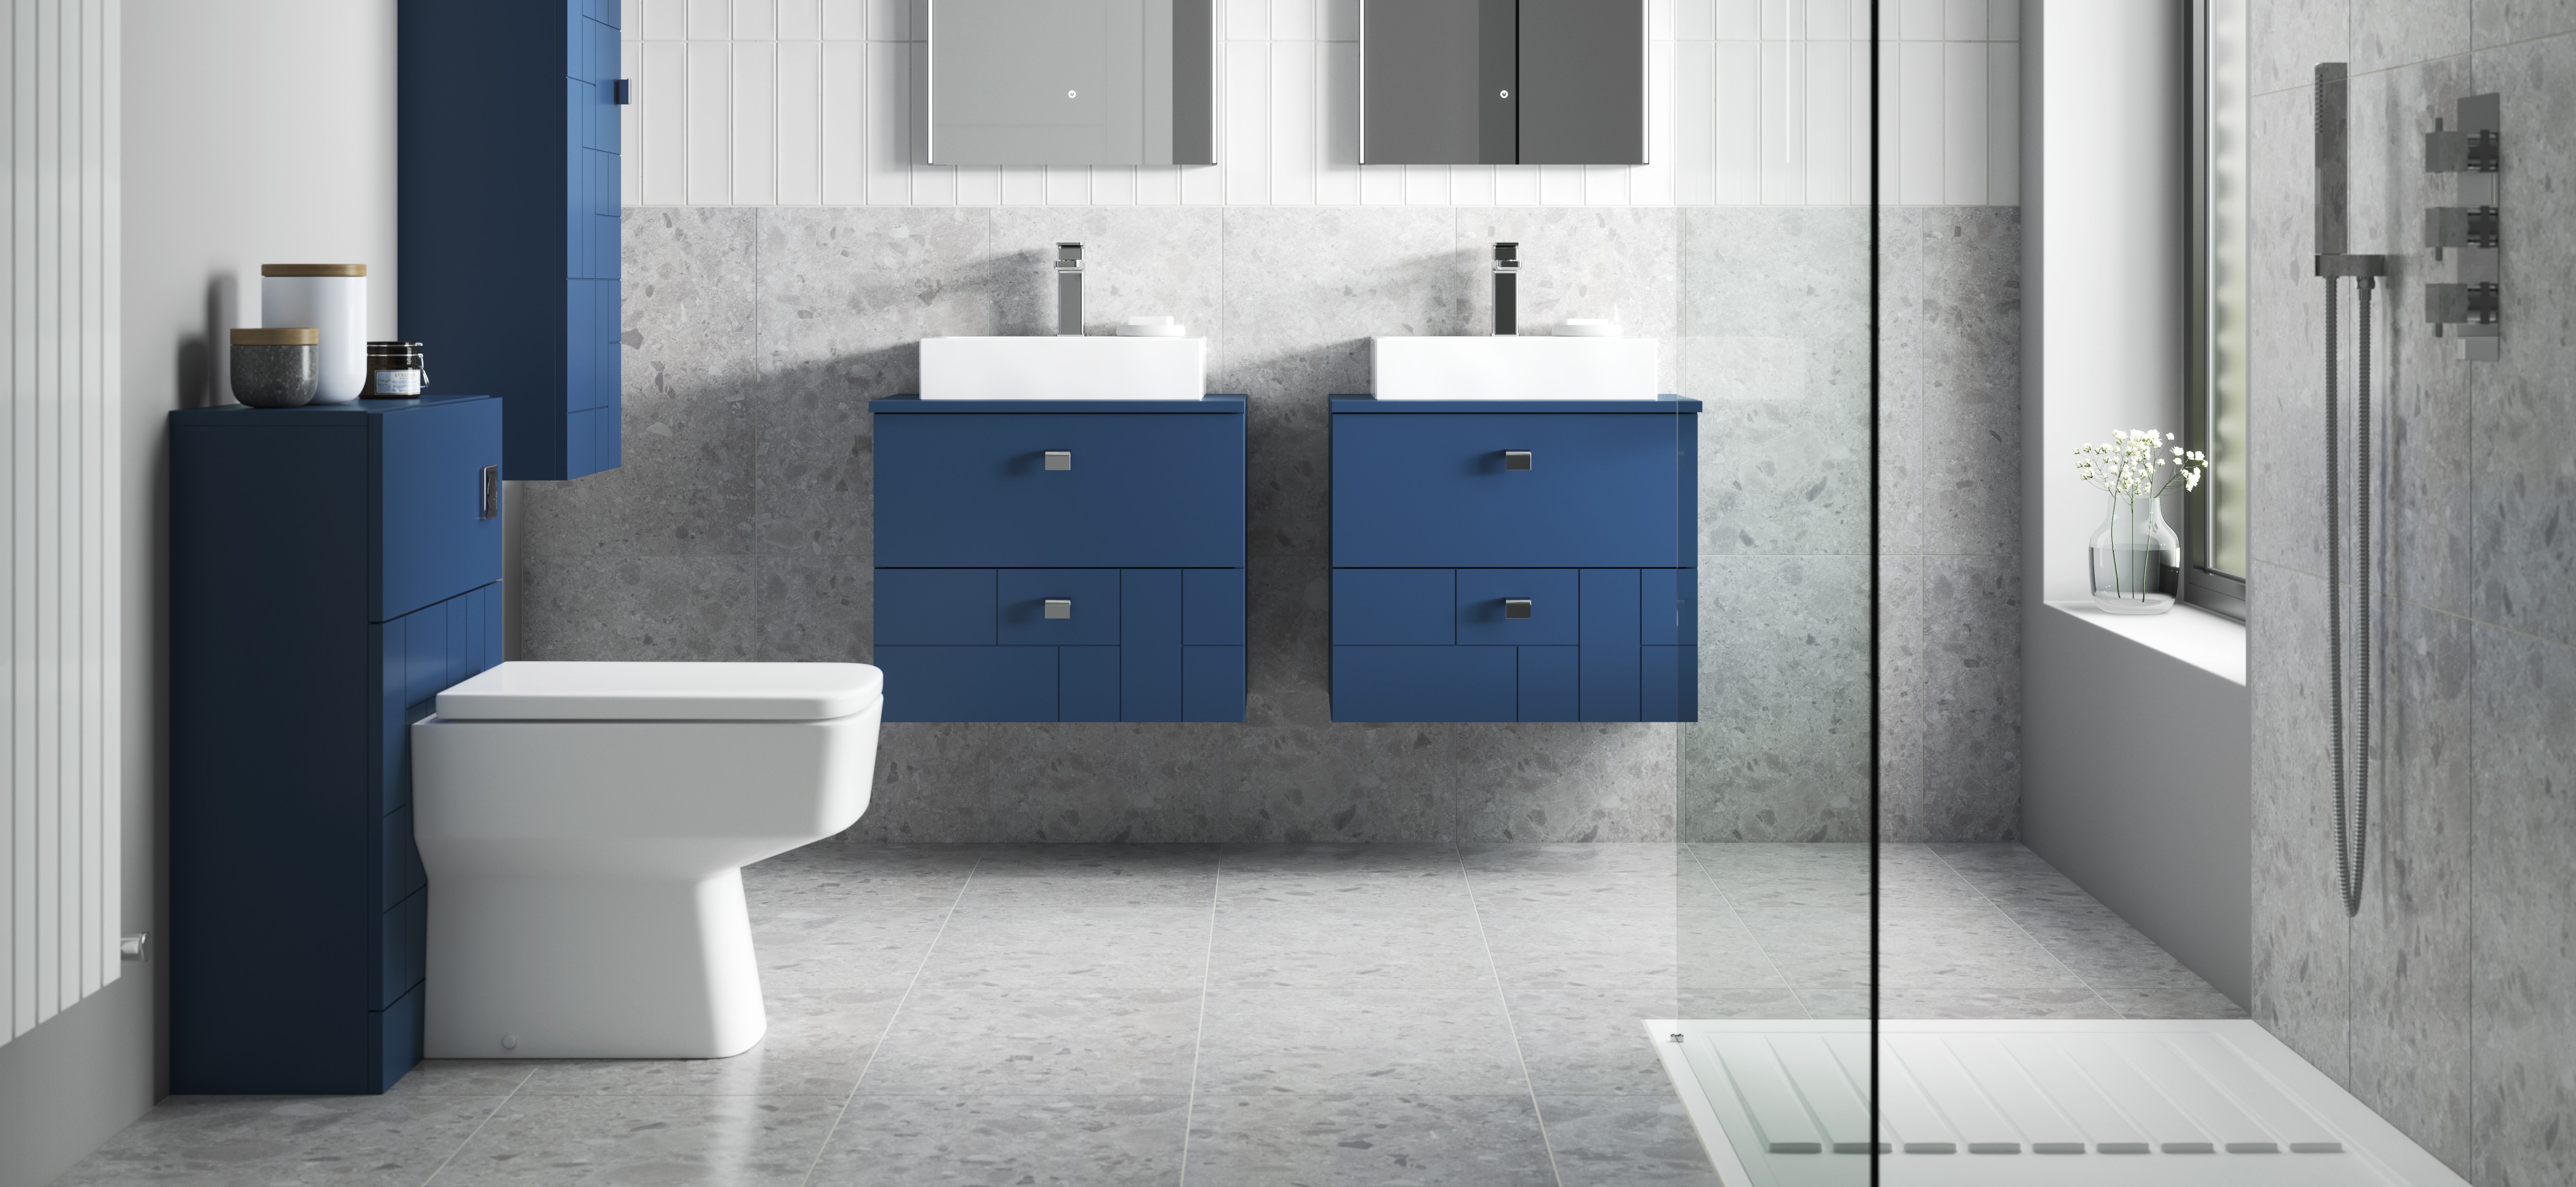 Bathroom Furniture Ideas for Spaces of All Shapes and Sizes